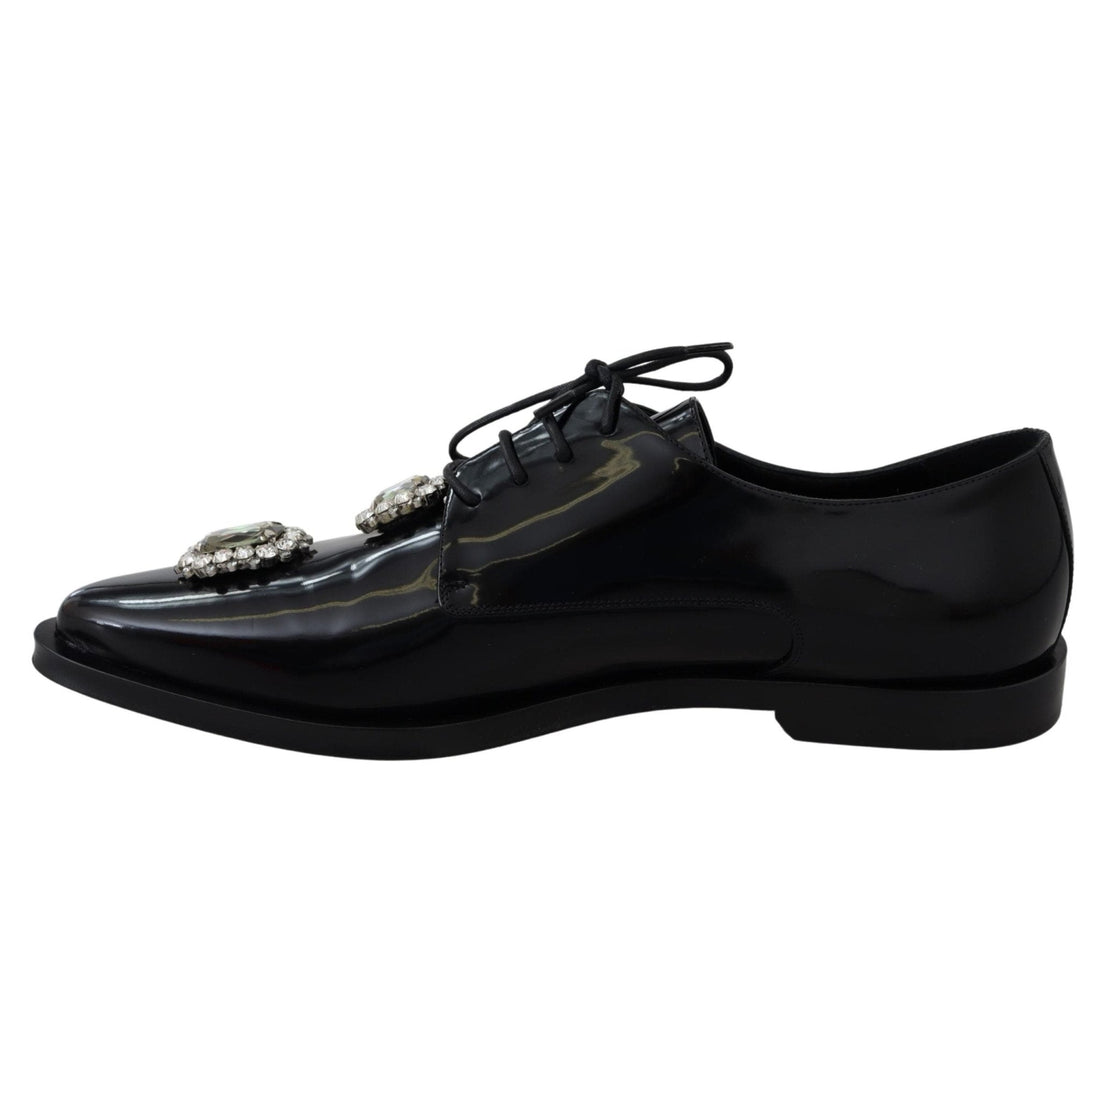 Dolce & Gabbana Black Leather Crystal Lace Up Formal Shoes - Paris Deluxe